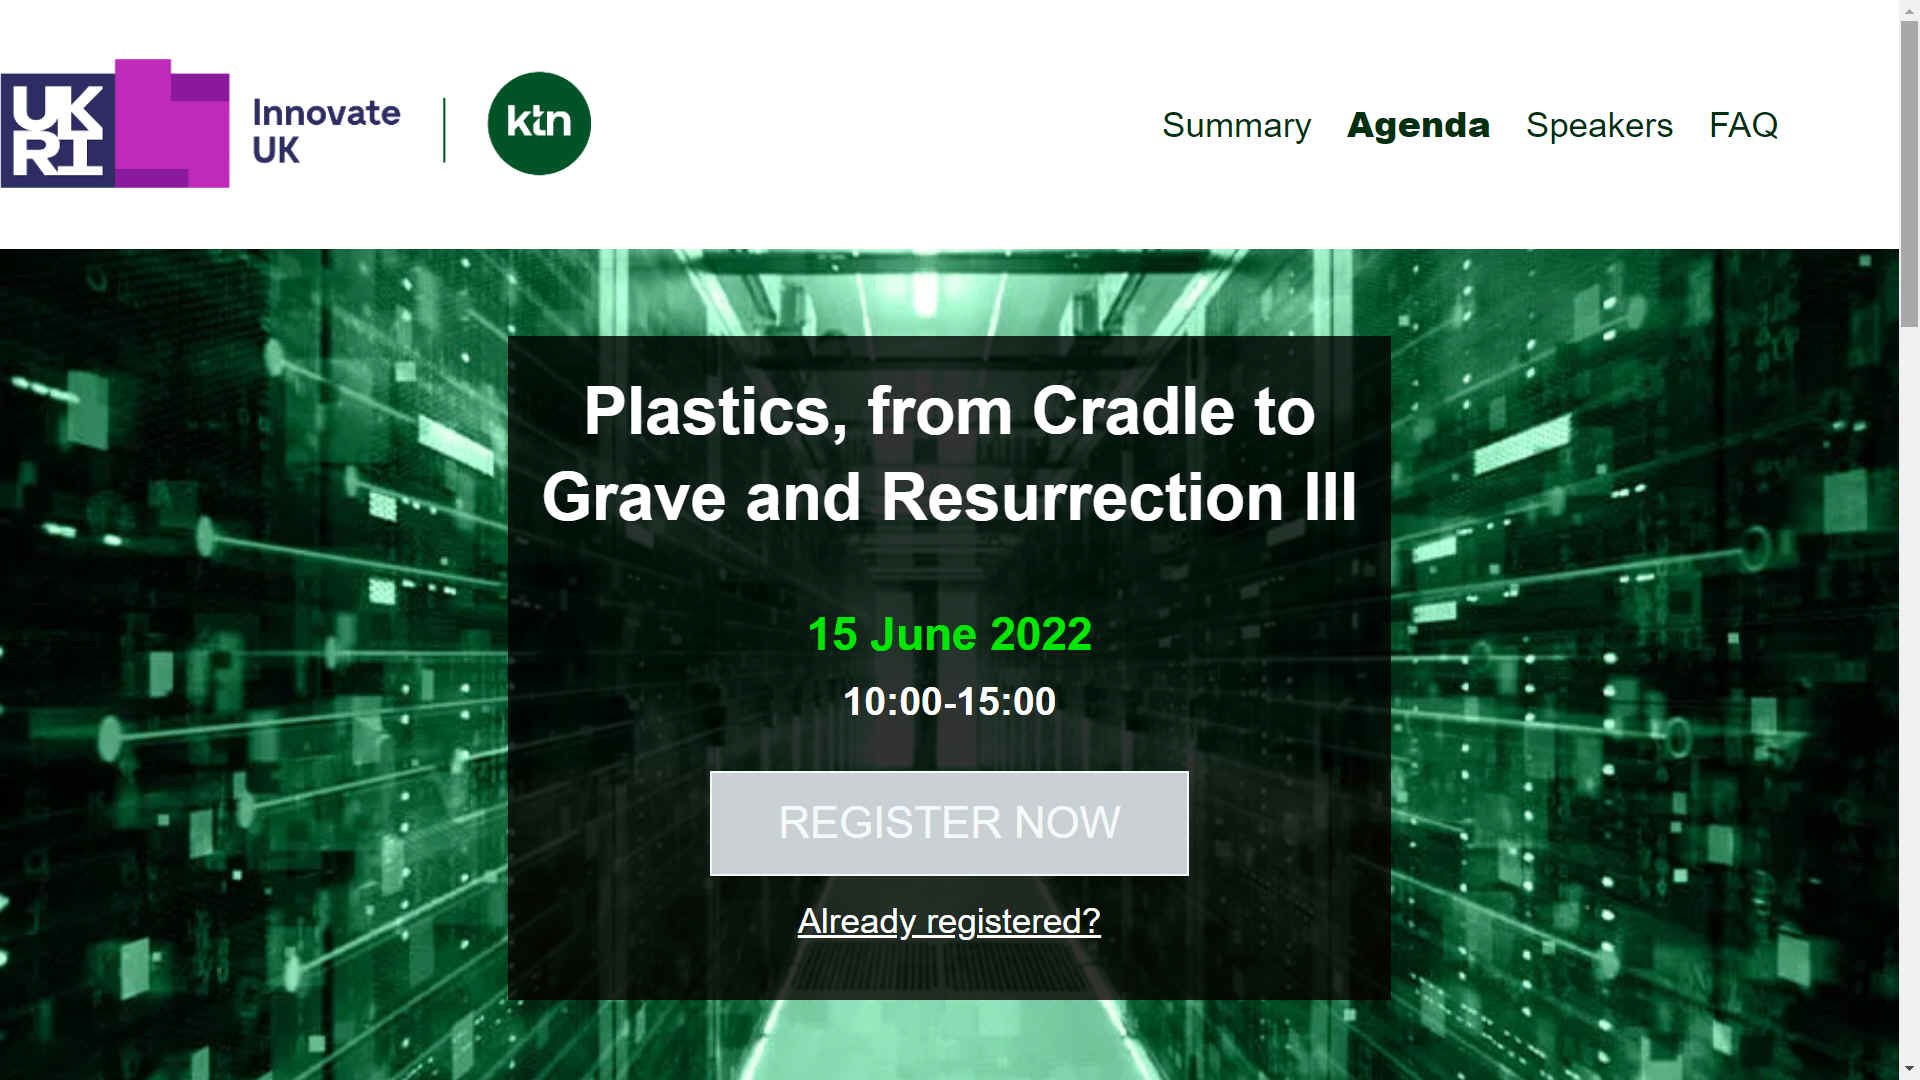 UKRI Plastics from cradle to the grave - research innovation - Innovate UK